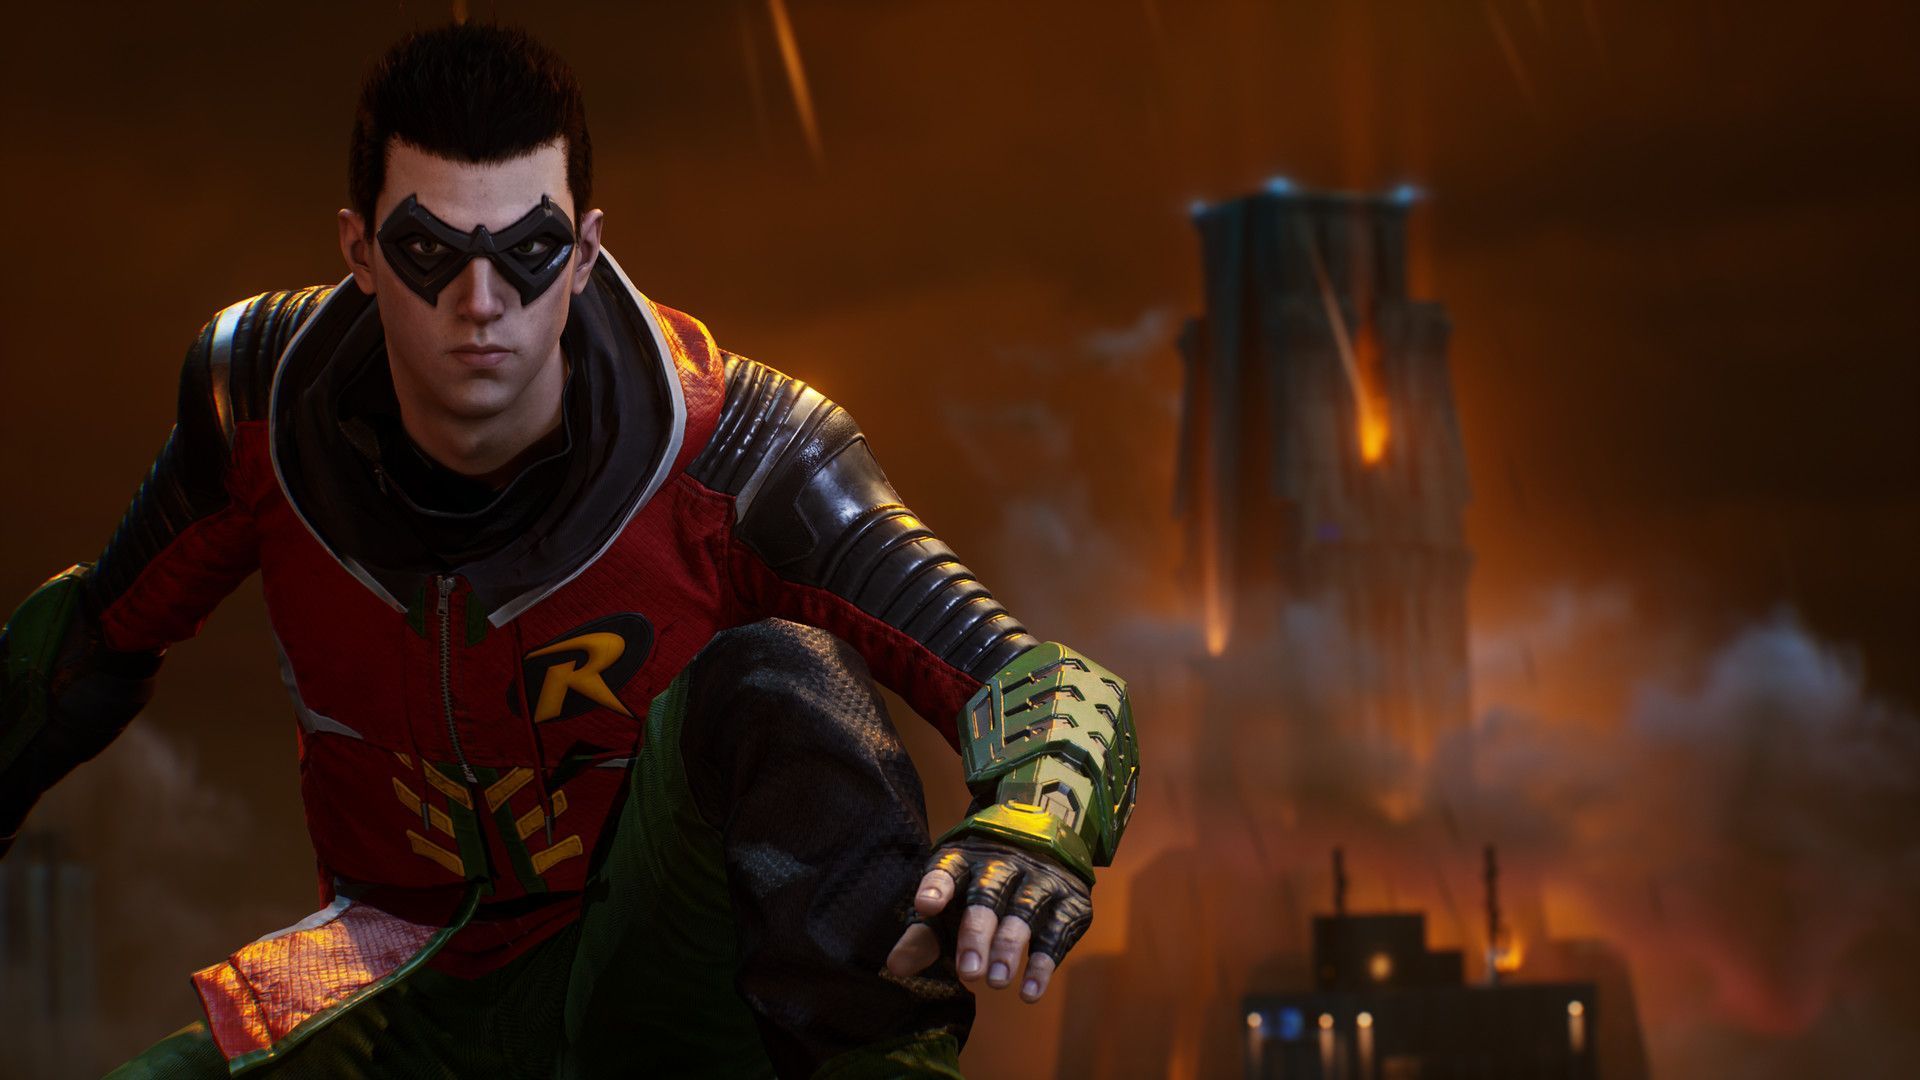 In this article, we are going to be covering how to switch characters Gotham Knights, so you can enjoy the new game to the fullest with all 4 characters.